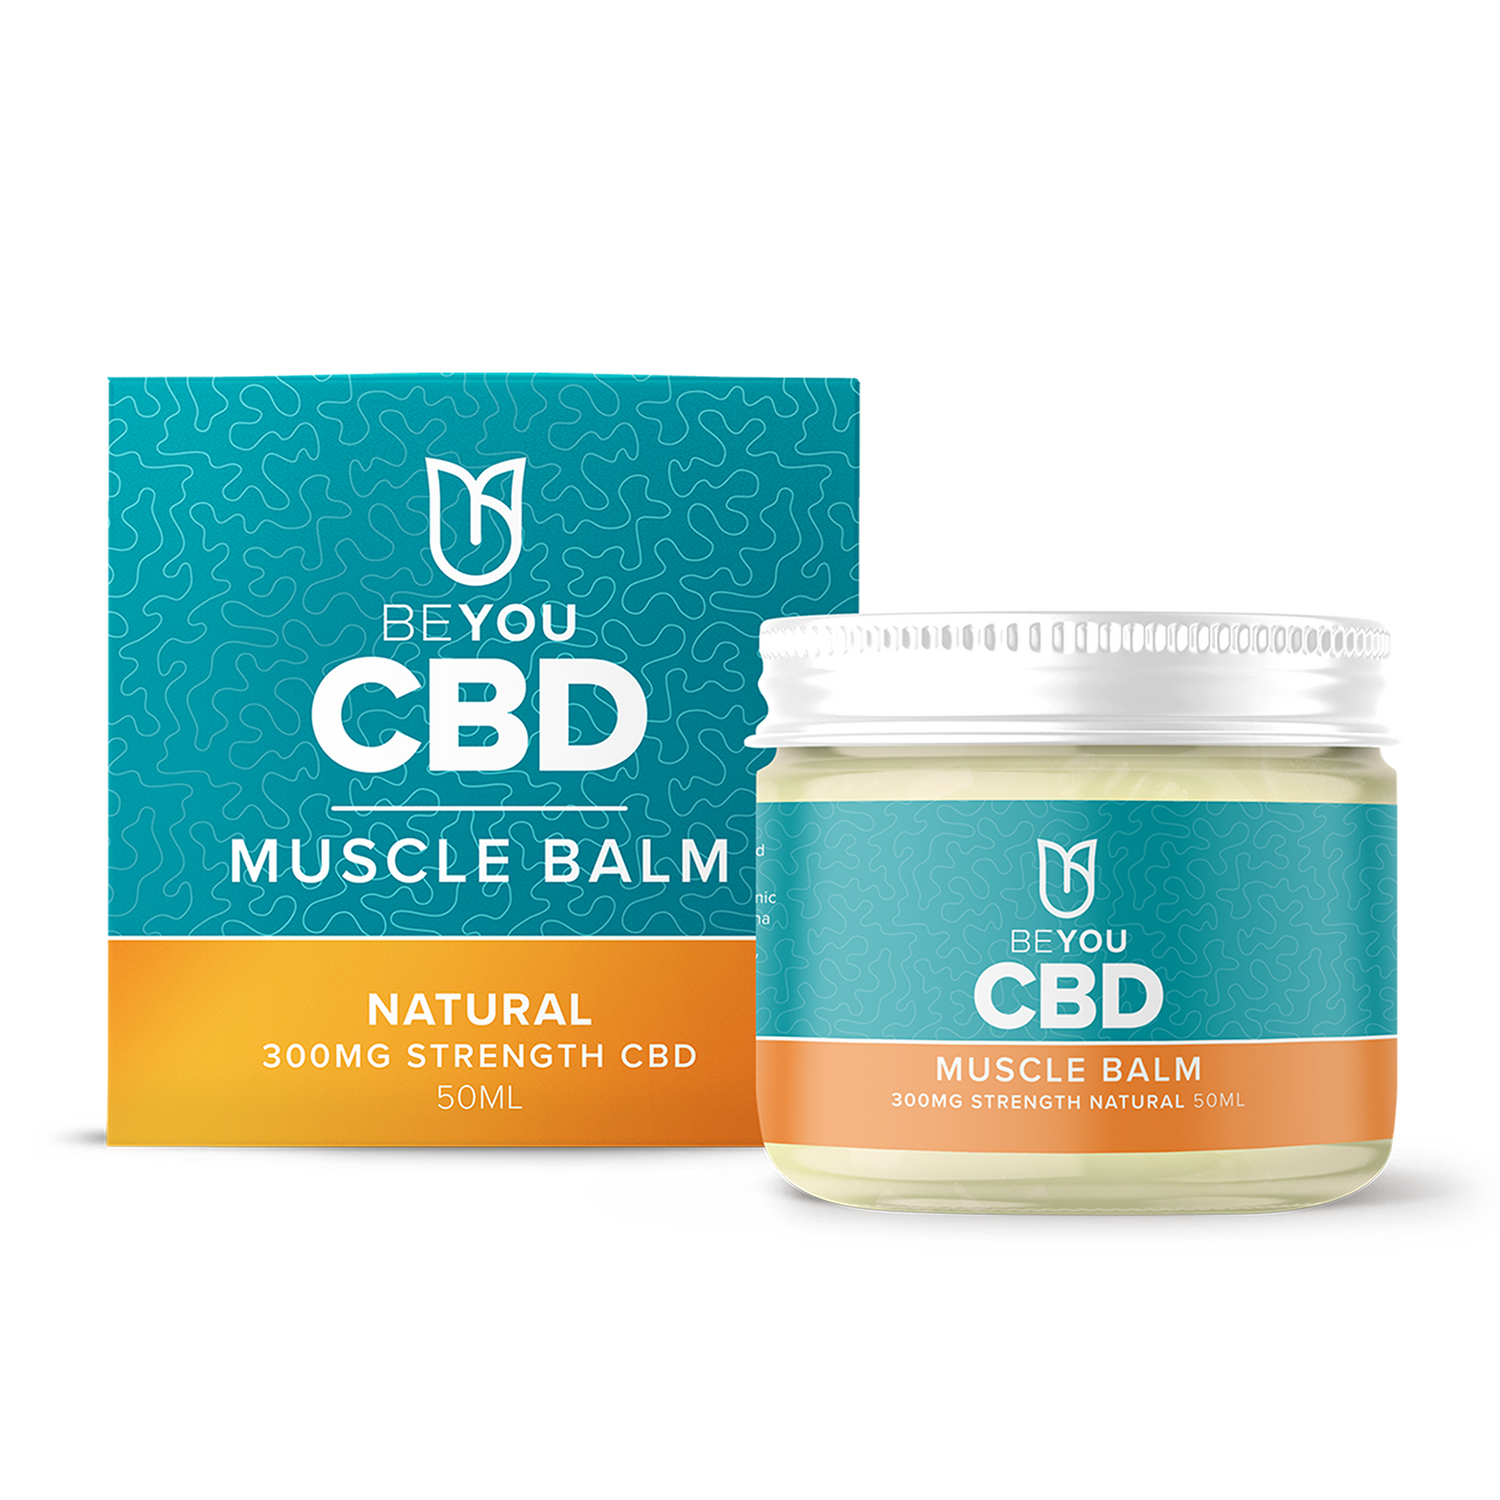 CBD muscle balm for muscle pain